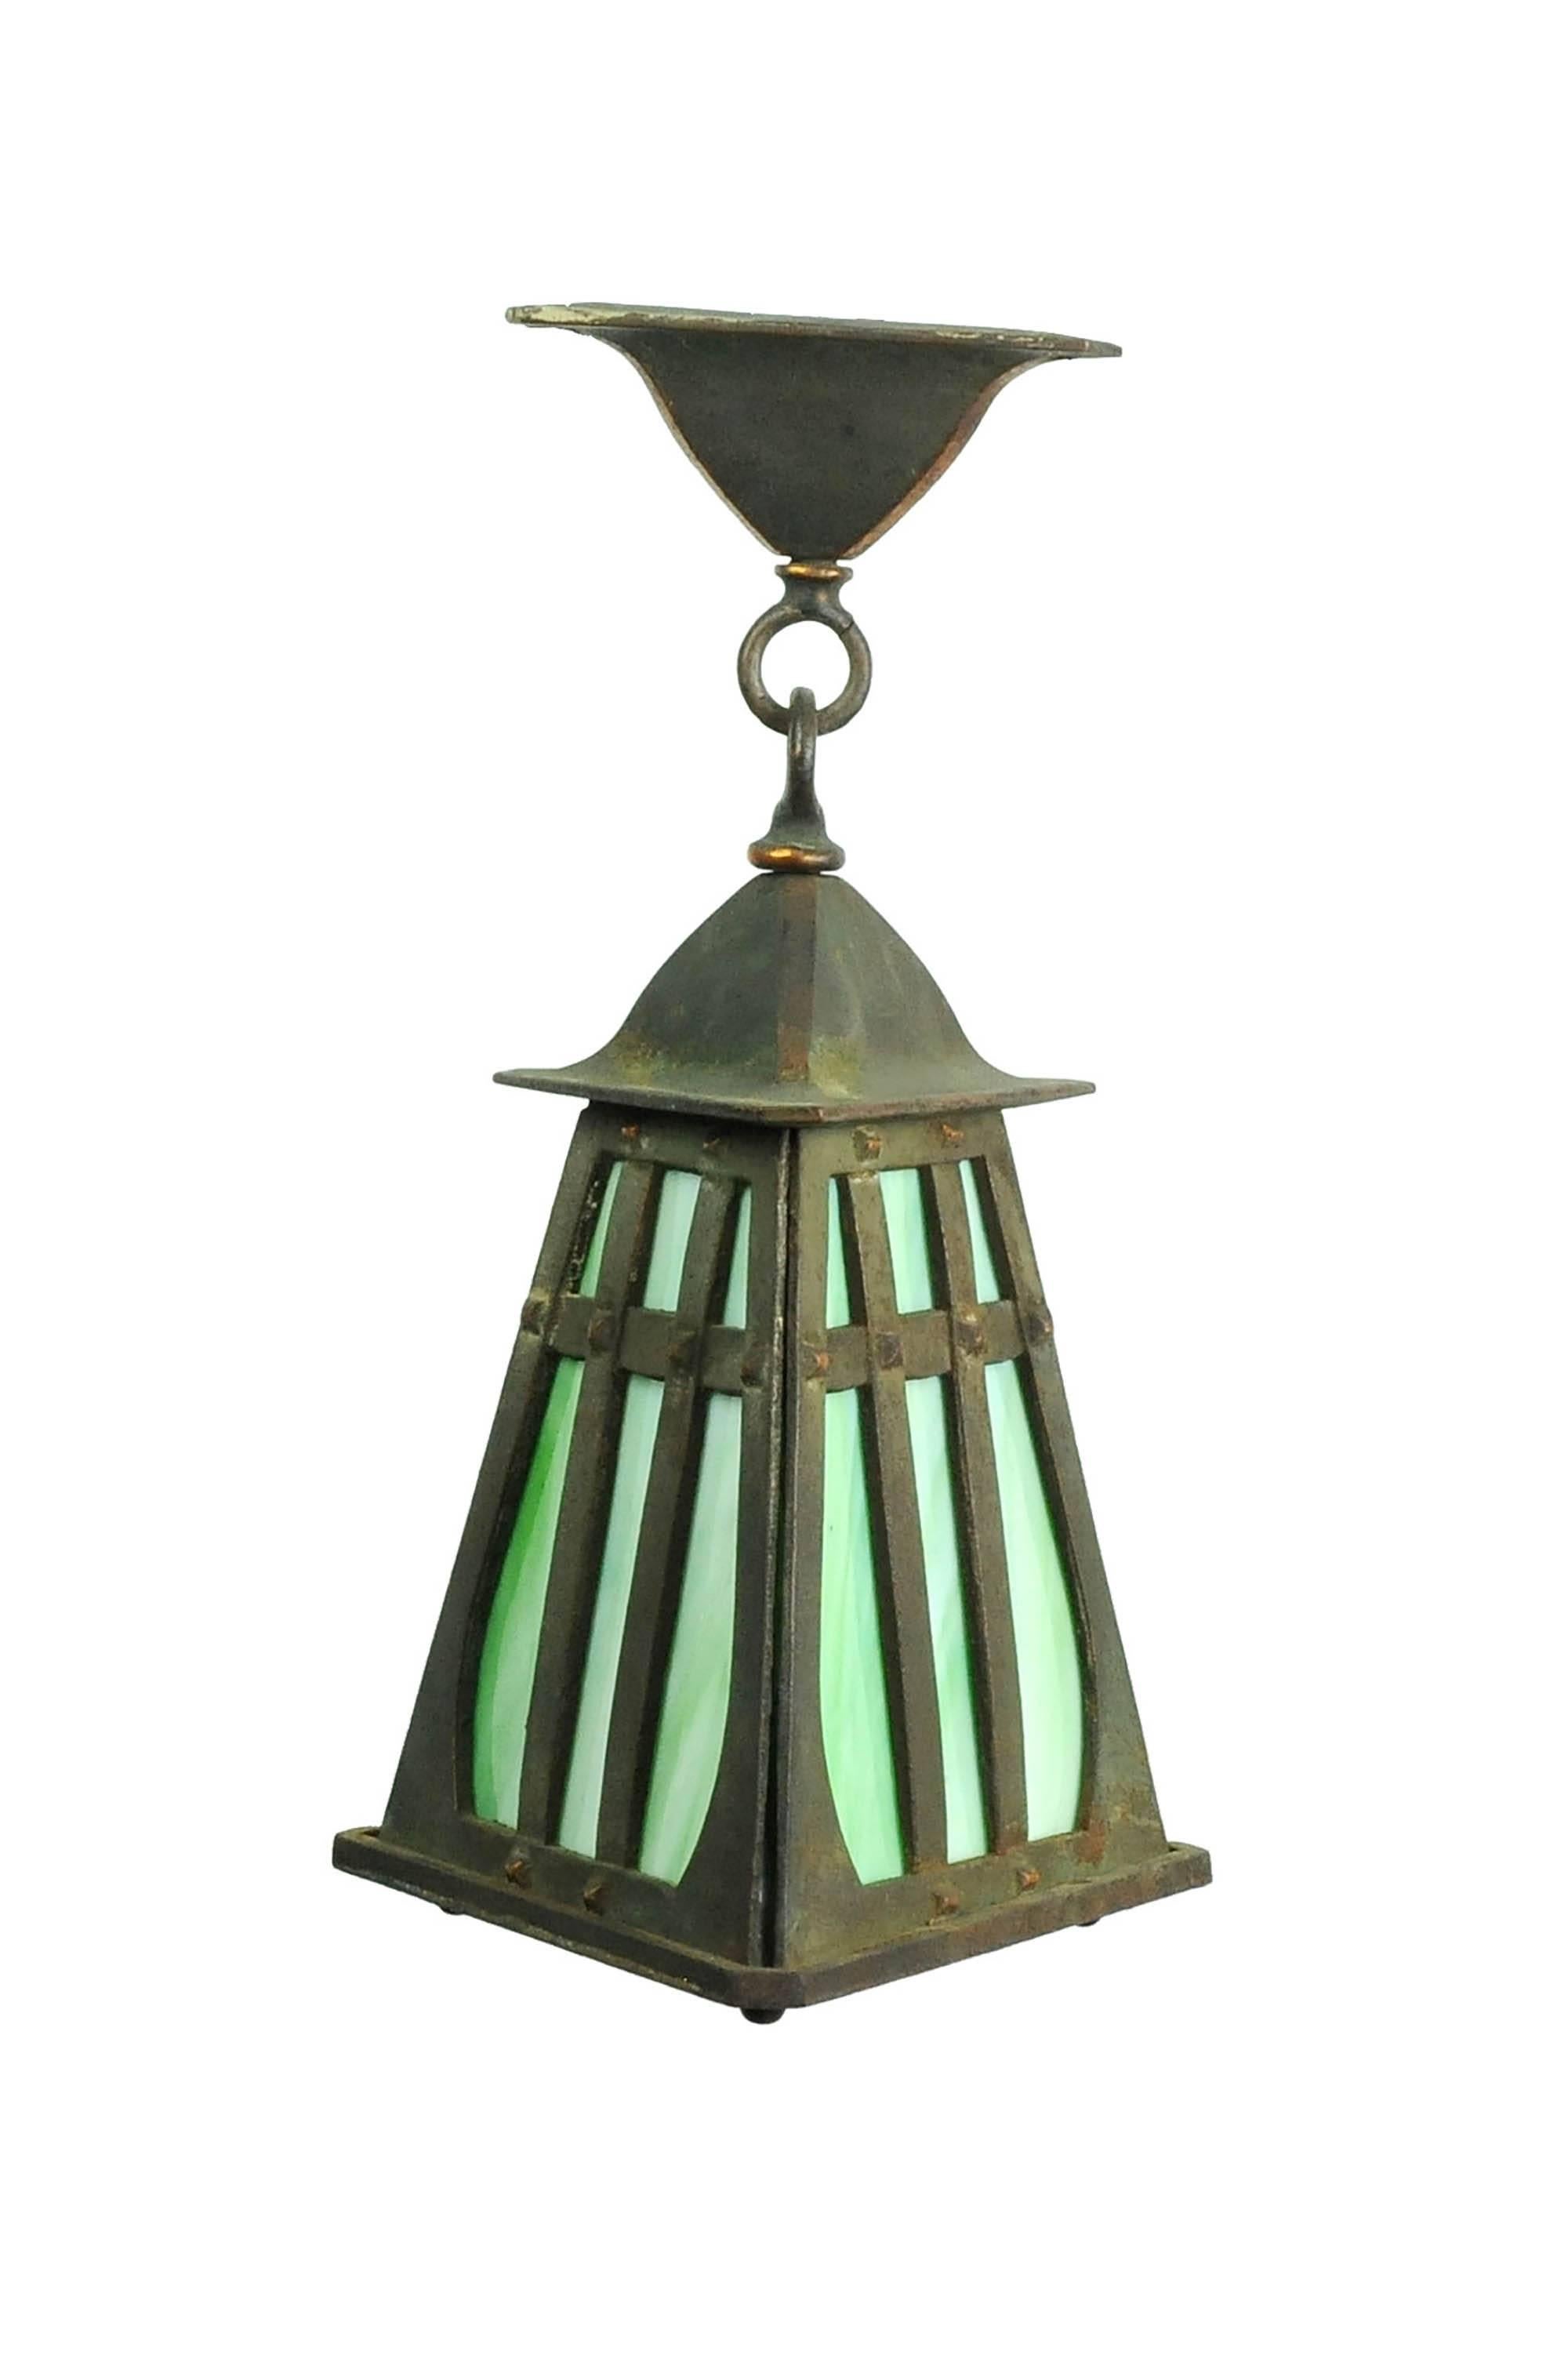 Classic craftsman pendant with beautifully oxidized copper plating and green slag glass. Perfect for a porch, kitchen, or other smaller space.

Finish: Original (copper-plated iron)
one medium socket

We find that early antique lighting was